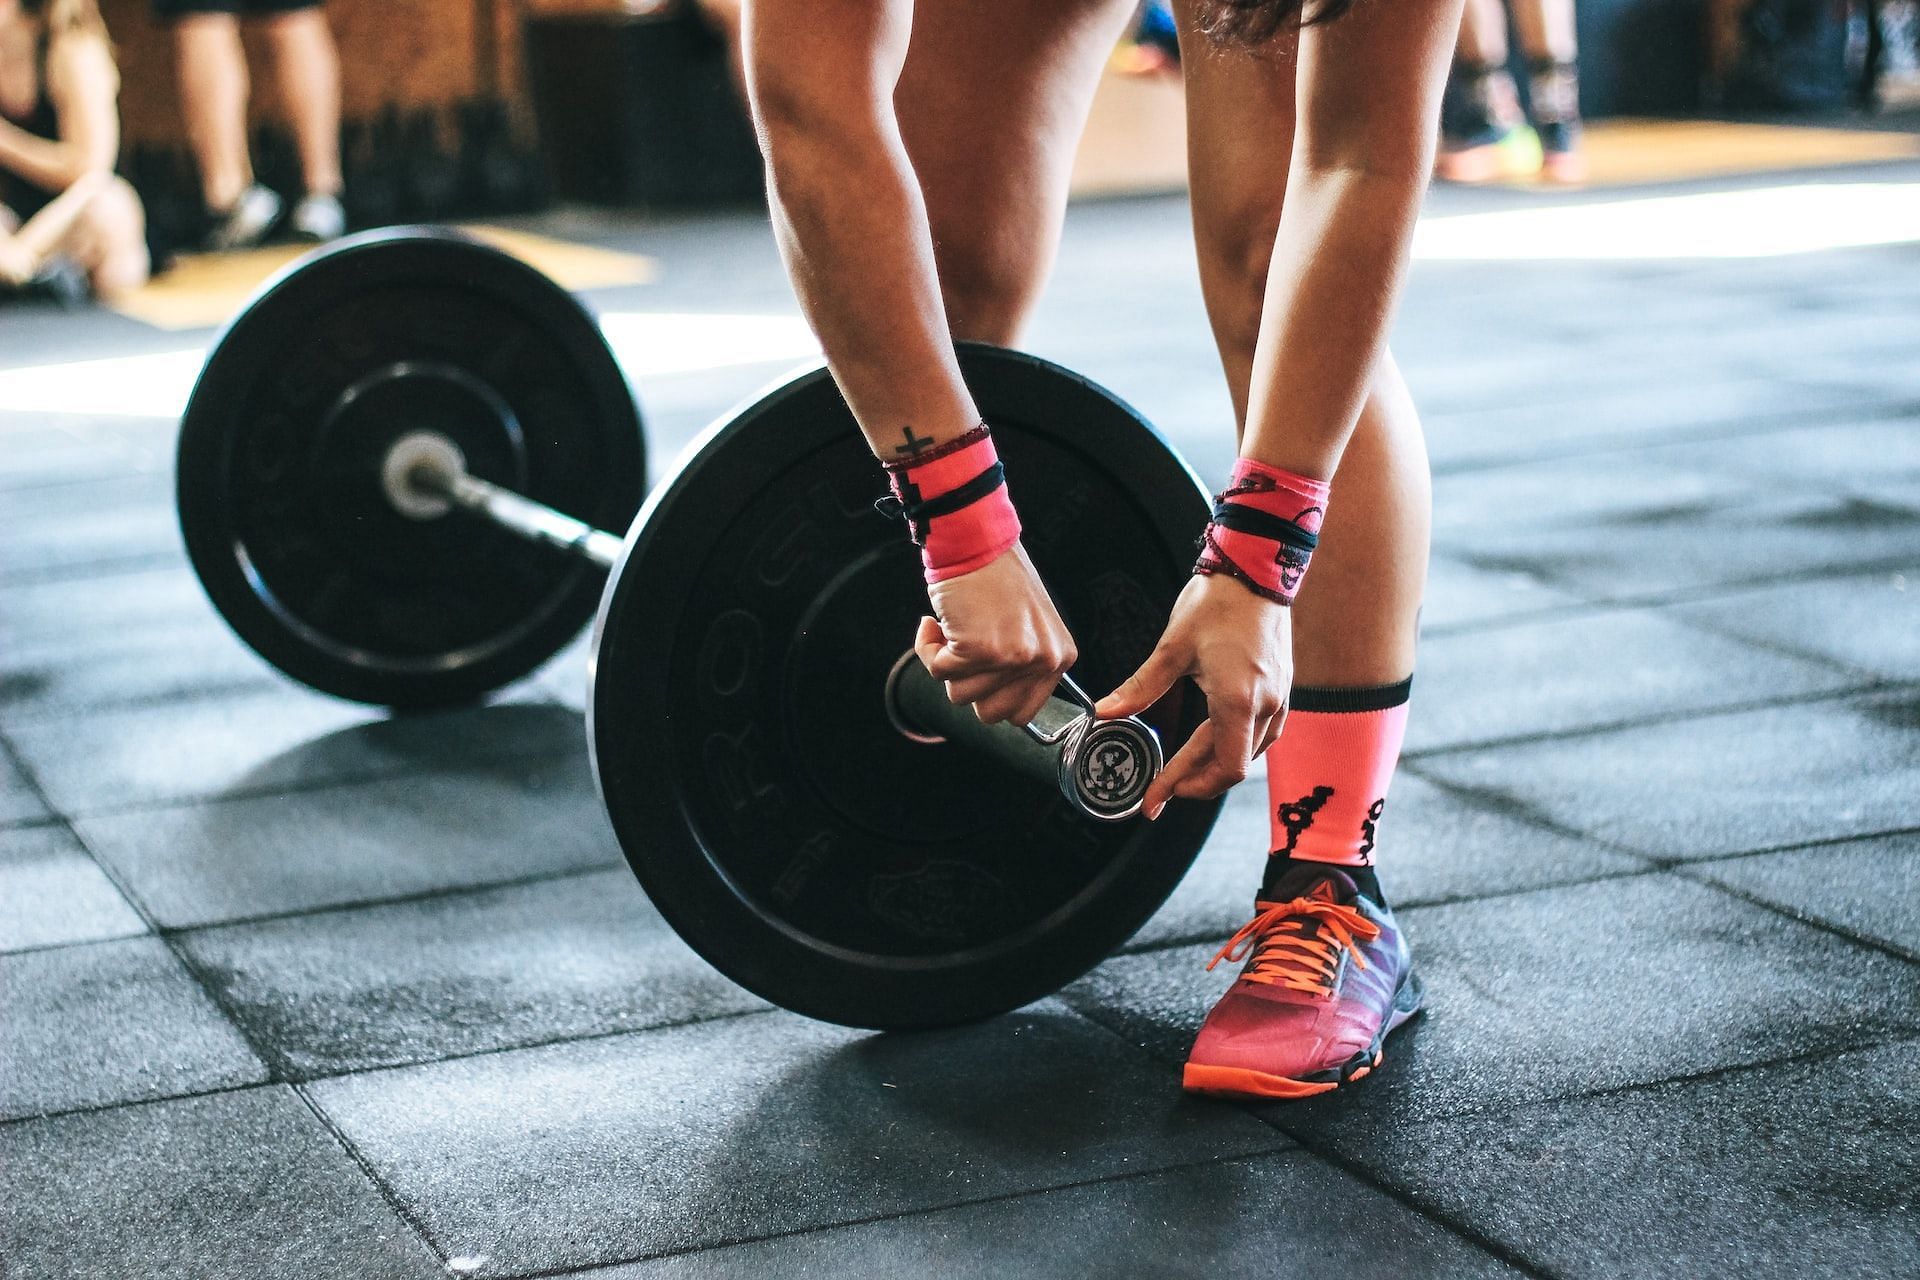 How to use deadlift straps for weightlifting? (Photo via Victor Freitas/Unsplash)